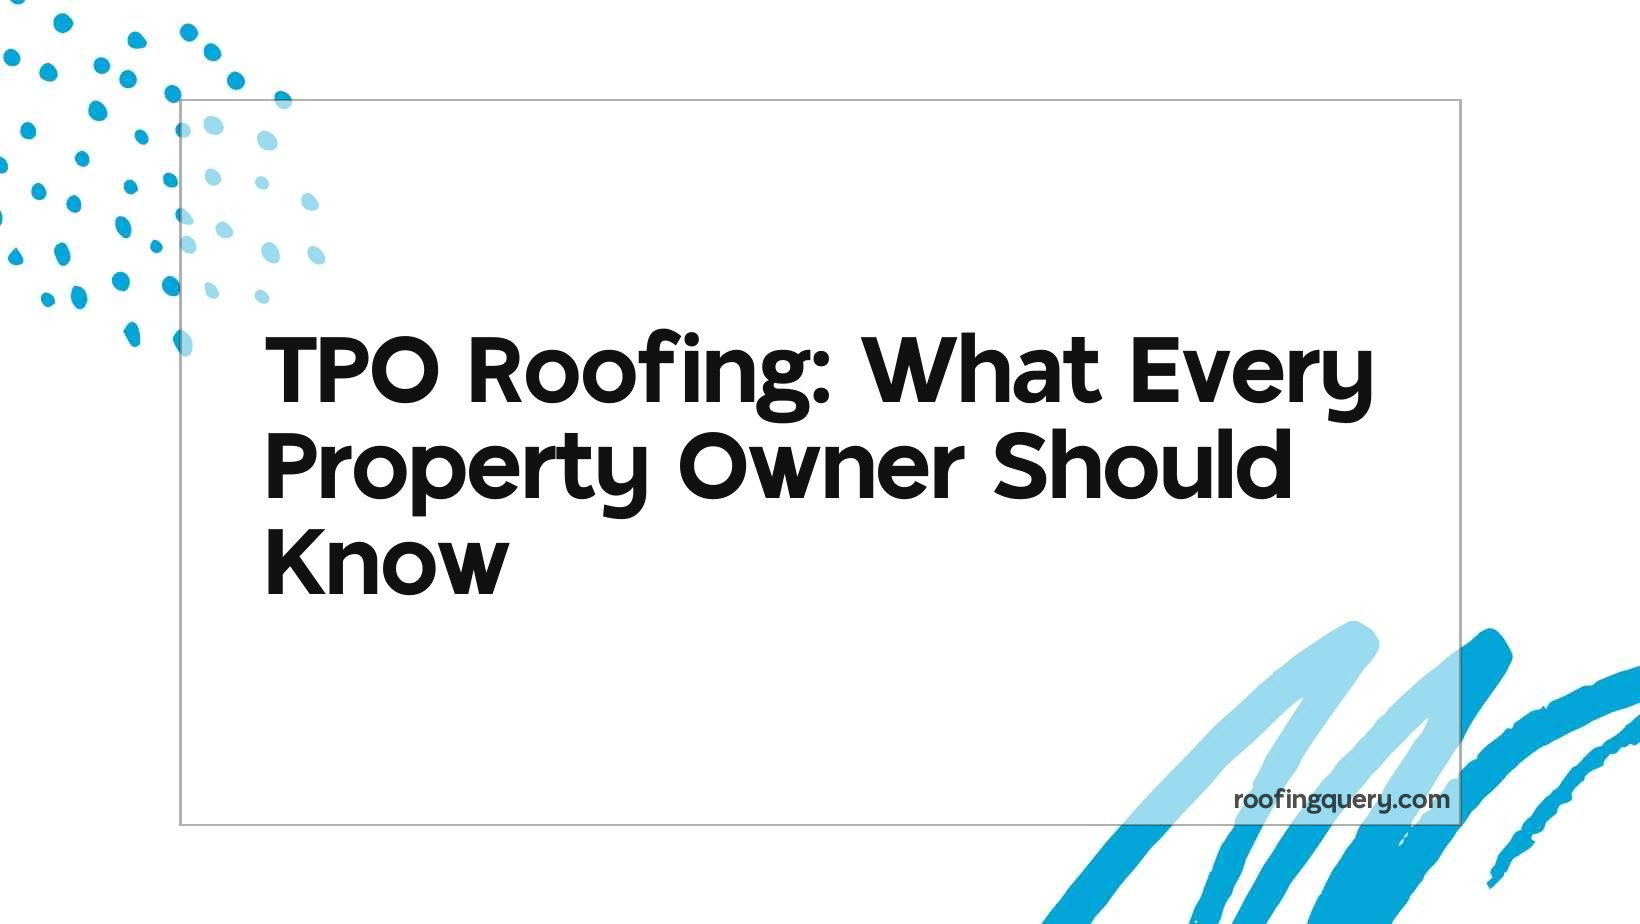 Tpo Roofing: What Every Property Owner Should Know